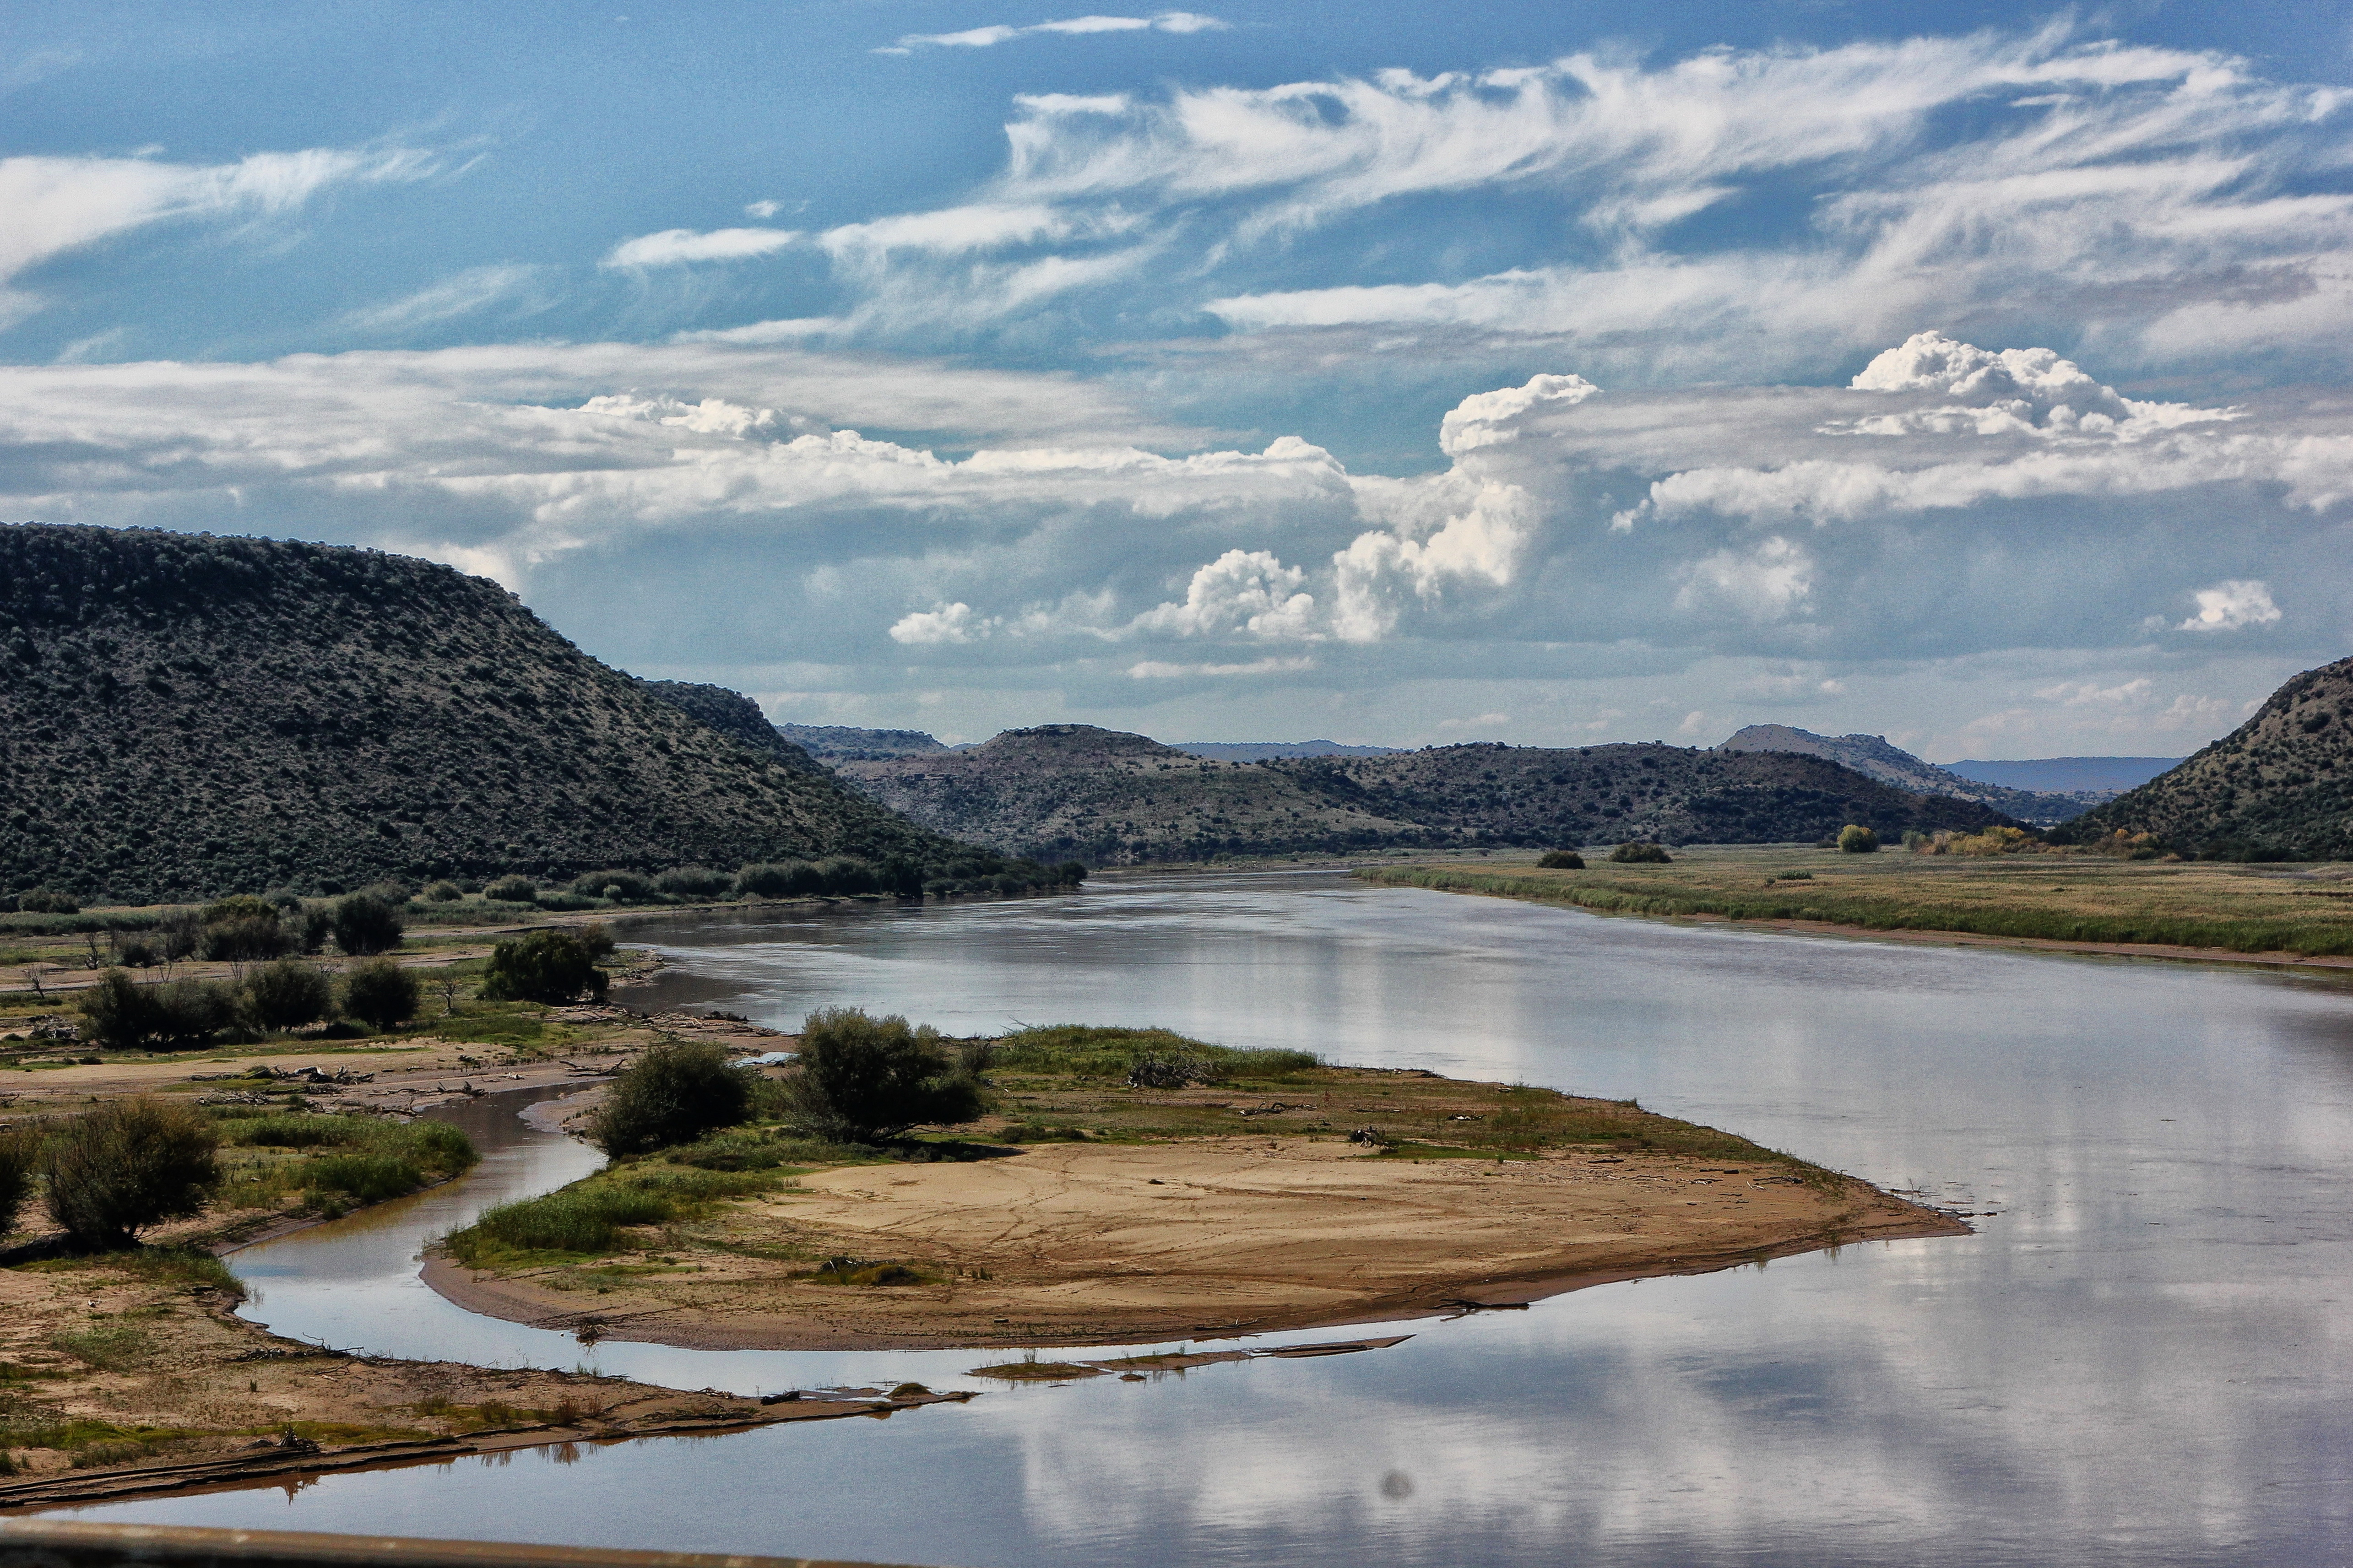 From 1912 onwards, several have seen the potential of a dam in this area, but it was only tackled in the 1960s. Image: Chris Marais